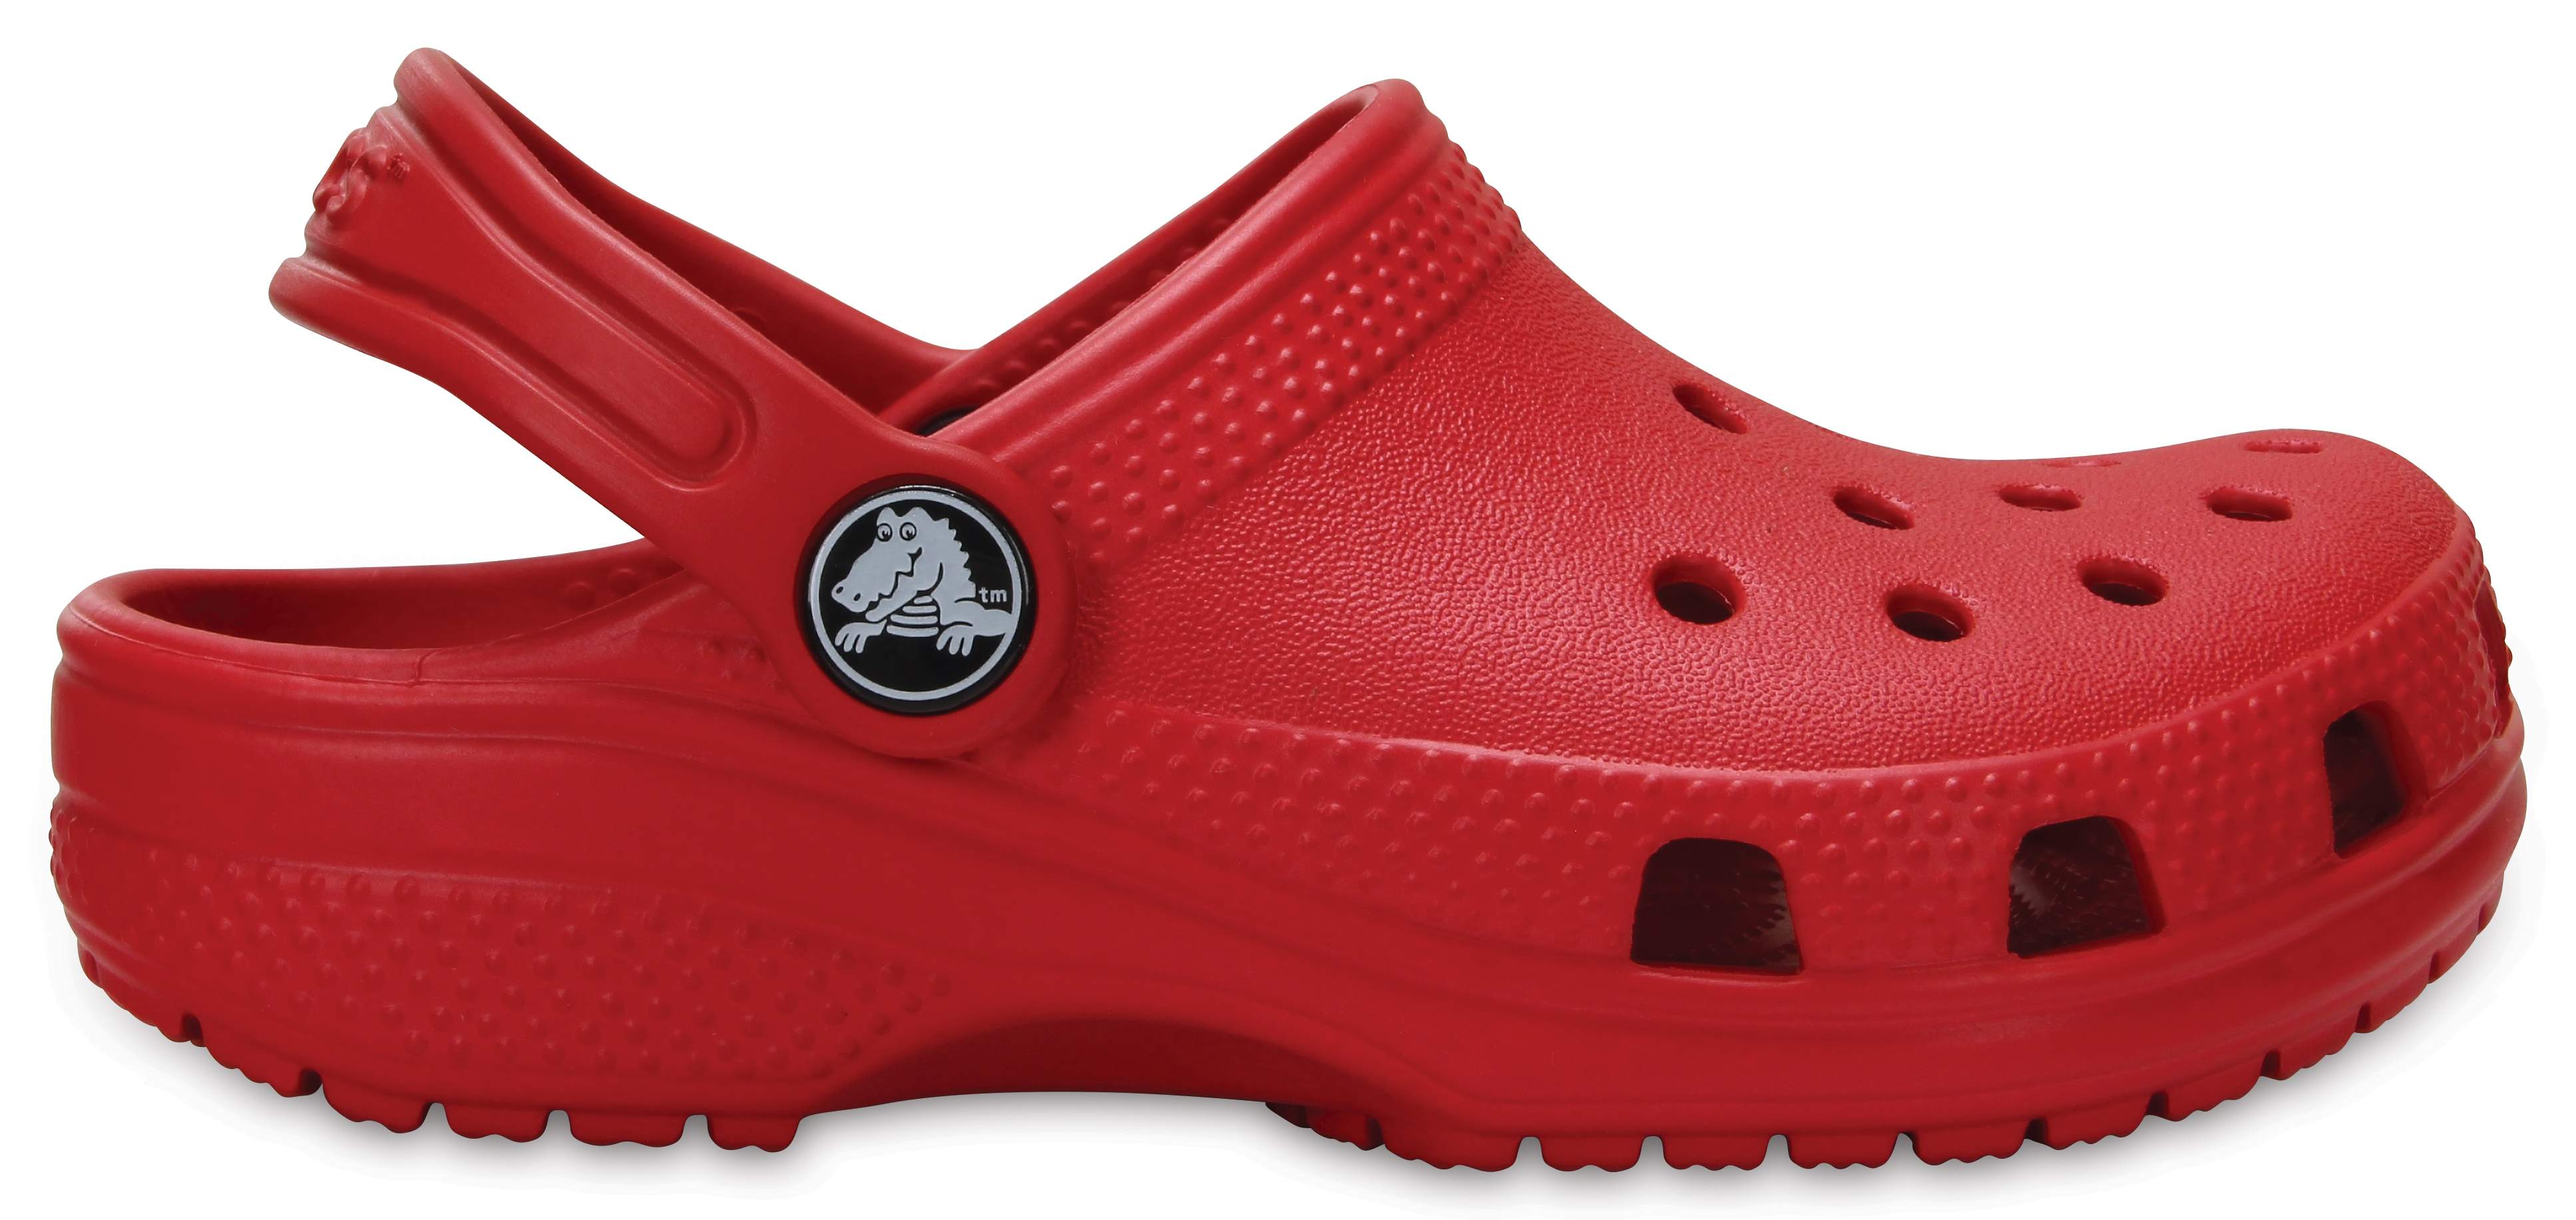 white crocs that say crocs on the side